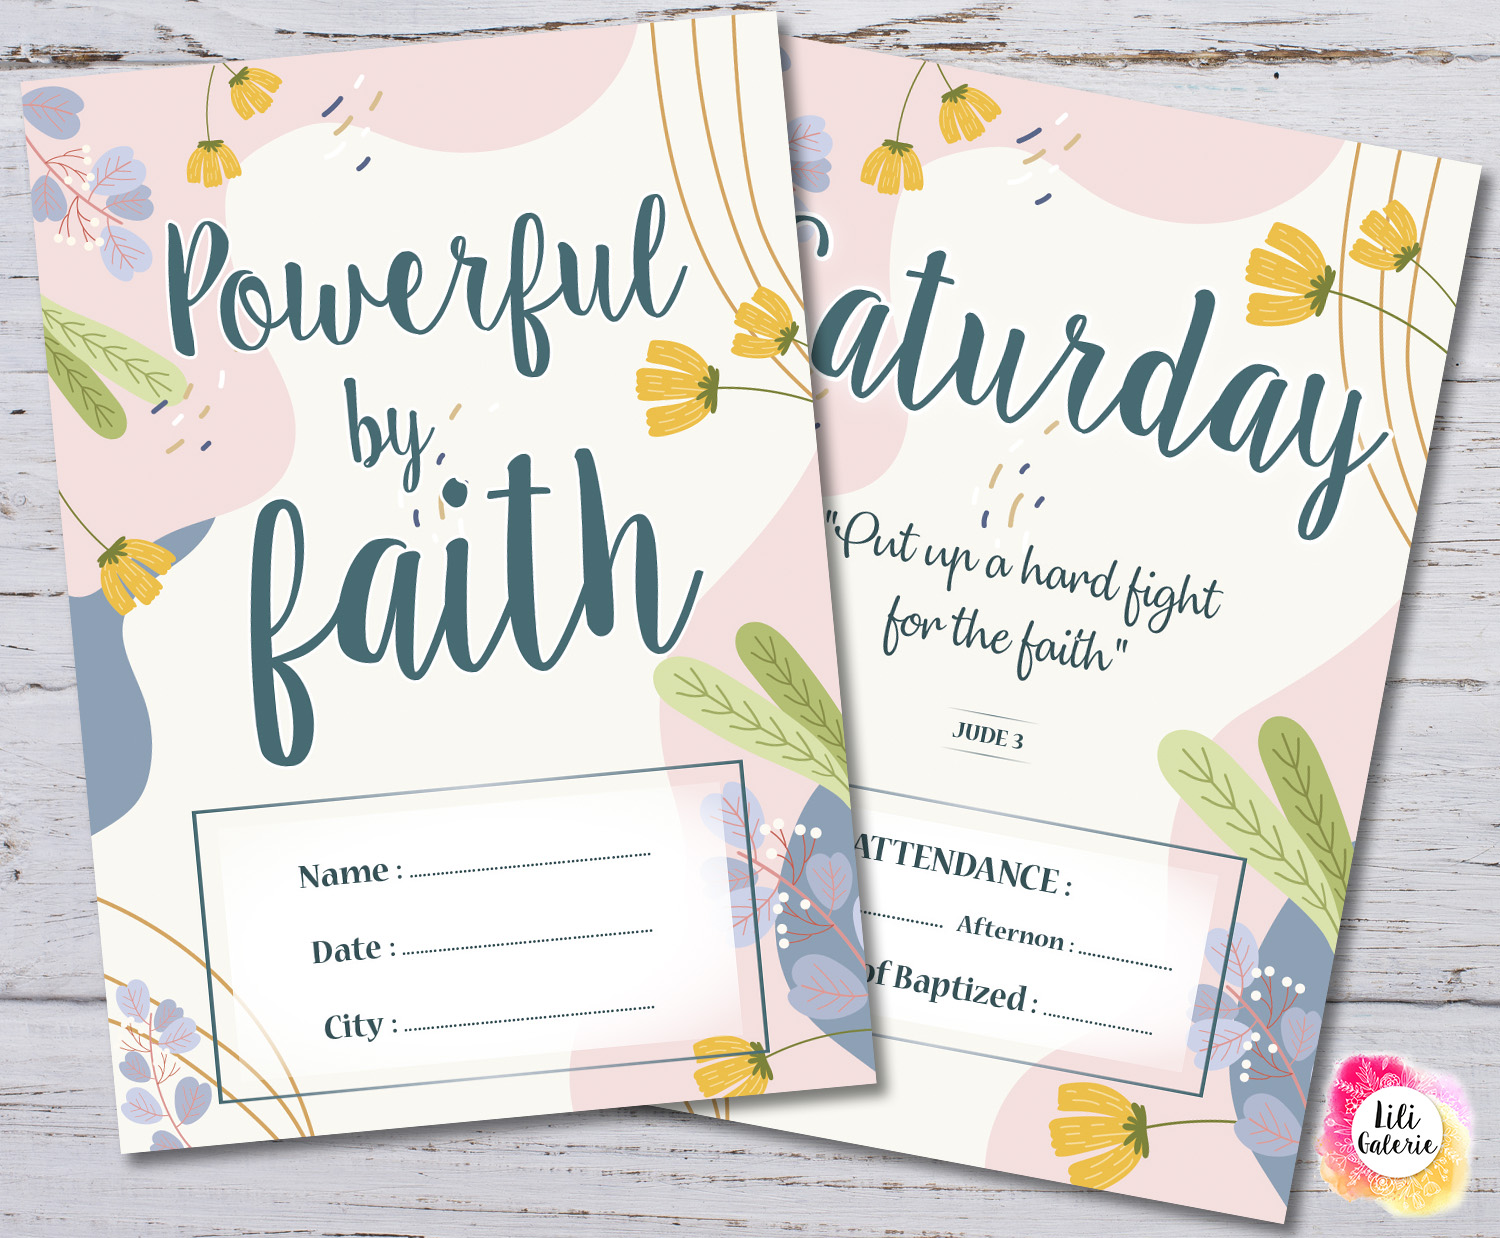 LiliGalerie-Convention Notebook 2021-powerful by faith